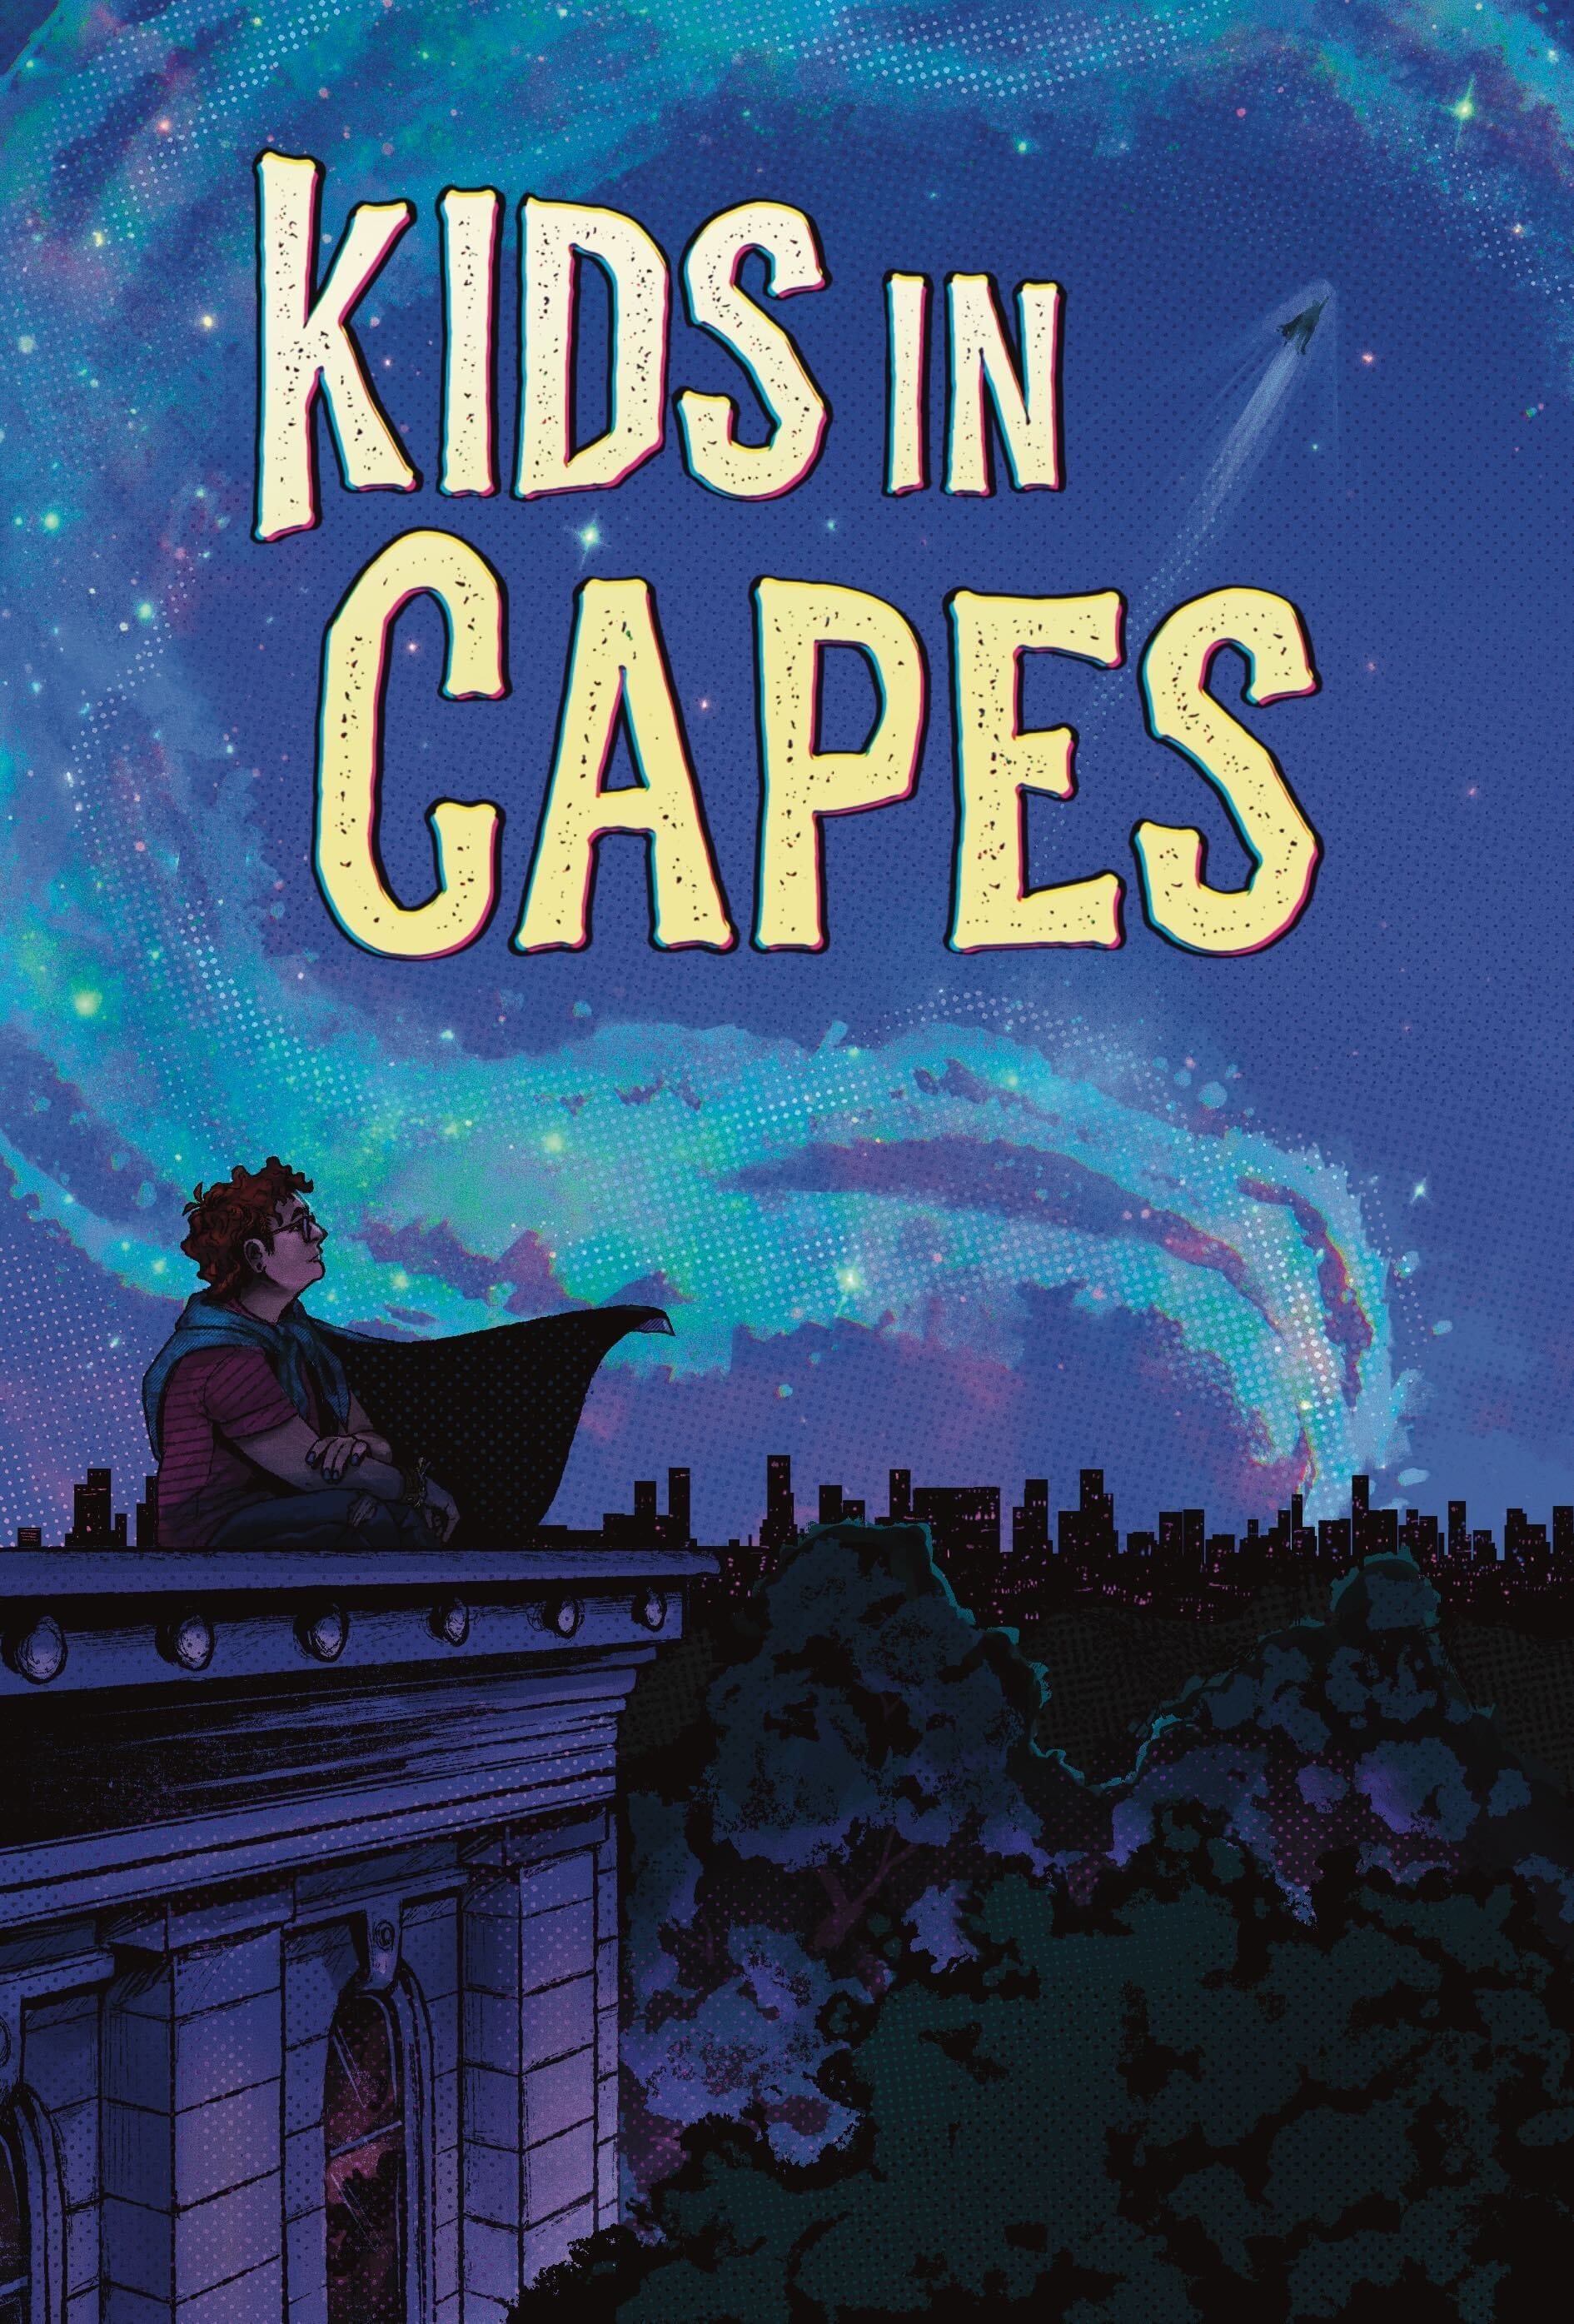 Hunters Entertainment Launches Kickstarter for “Kids in Capes”